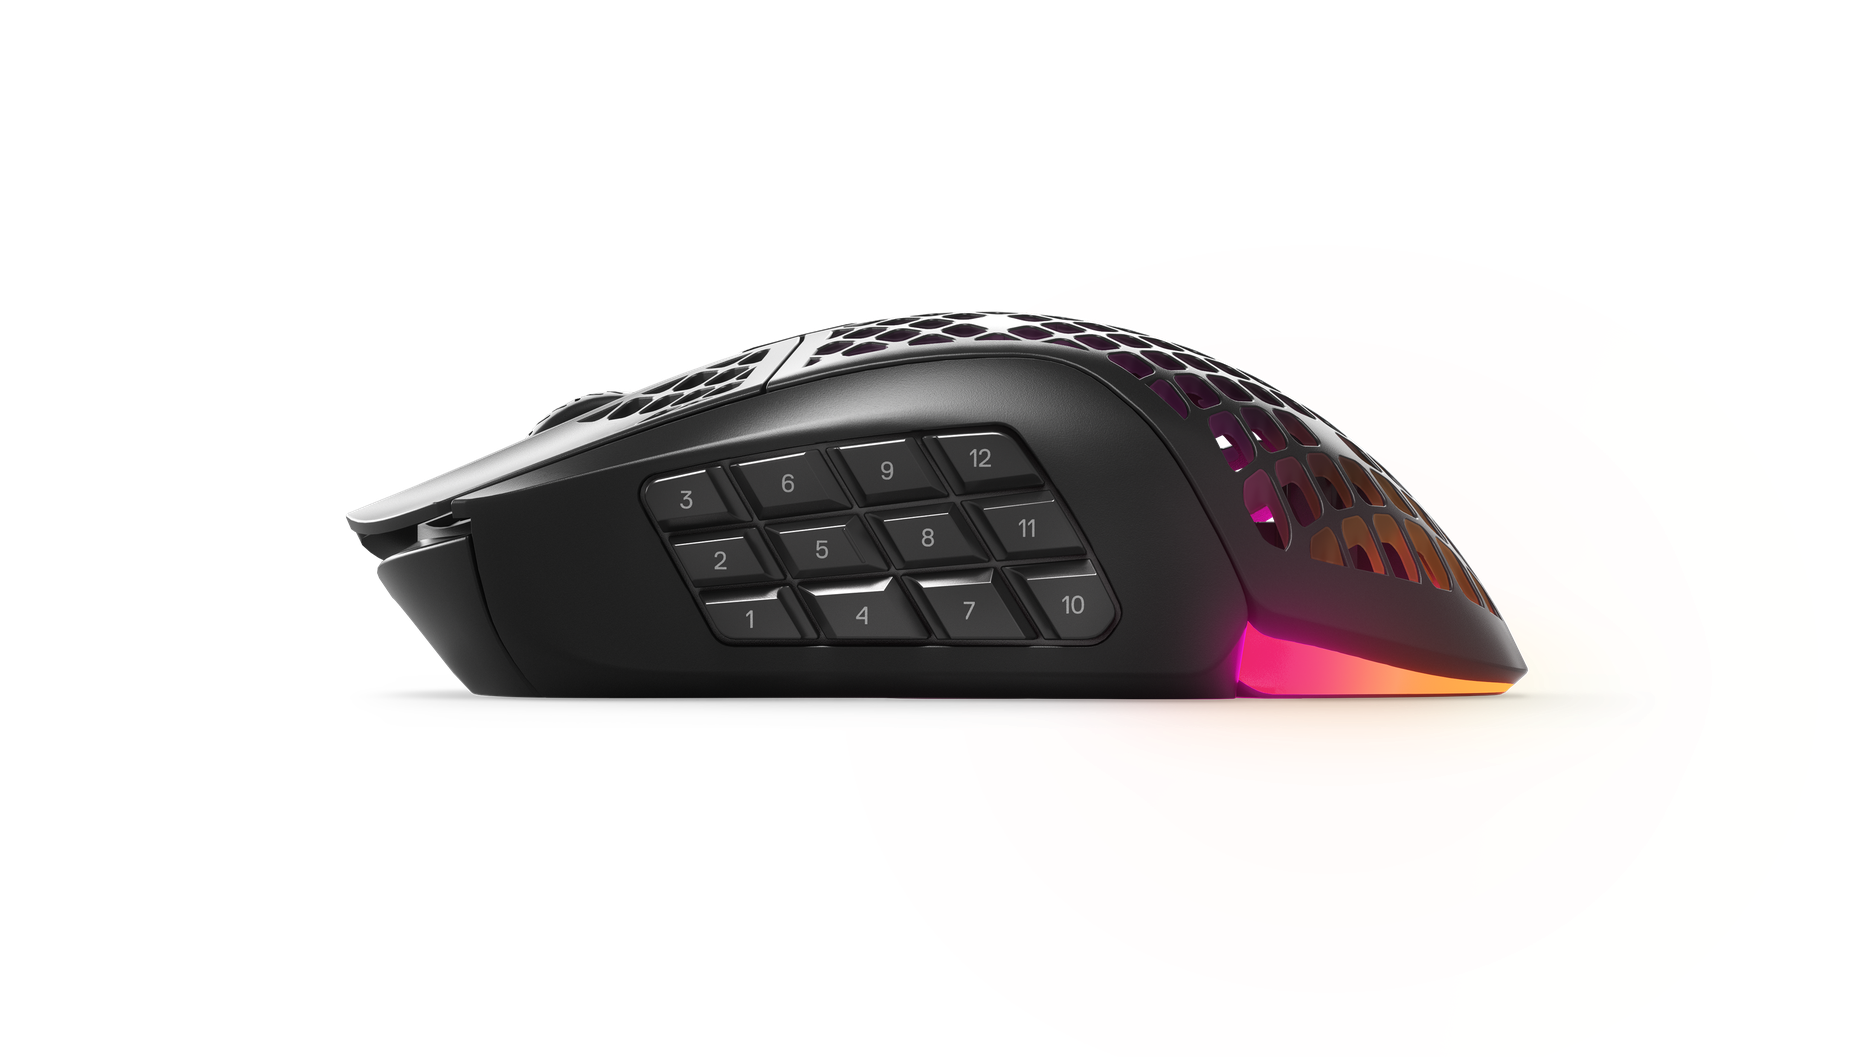 
 A side view of the Aerox 9 Wireless mouse showing off its numerous buttons.
 